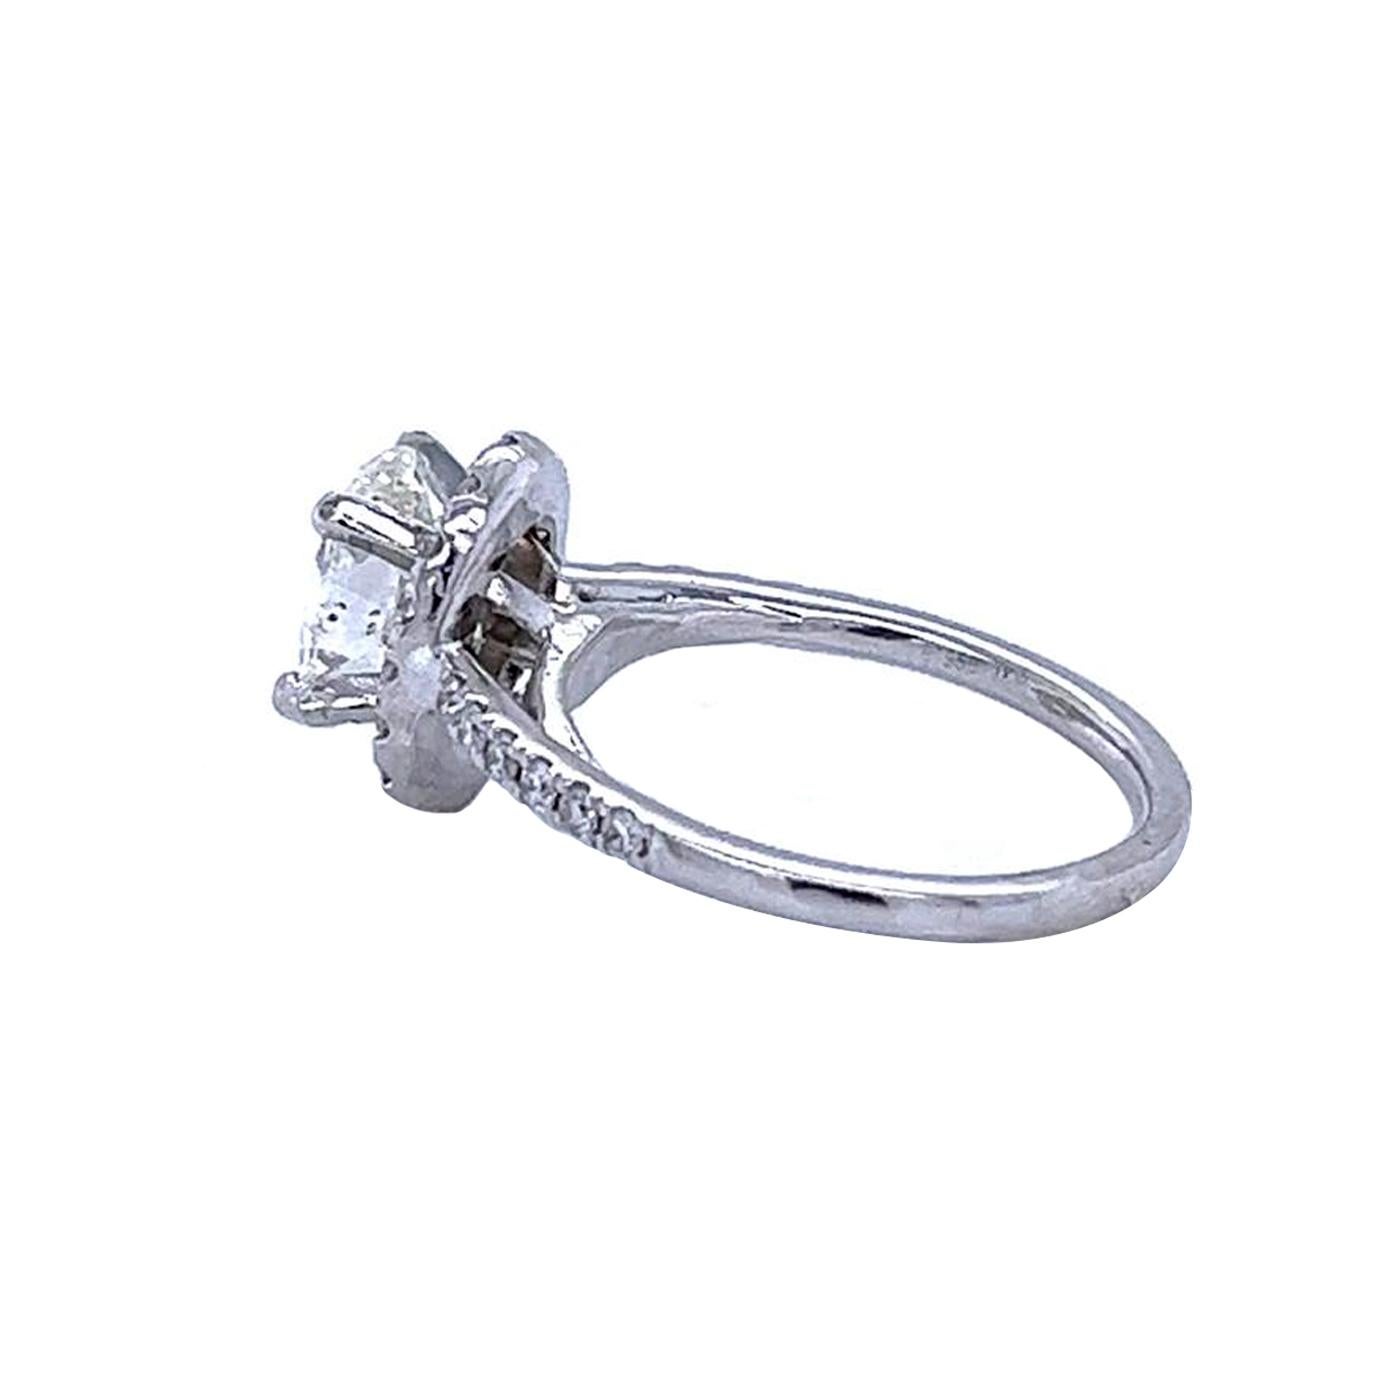 Modernist Highly Important GIA Certified 1.51 Carat Flawless Platinum Oval Diamond Ring For Sale